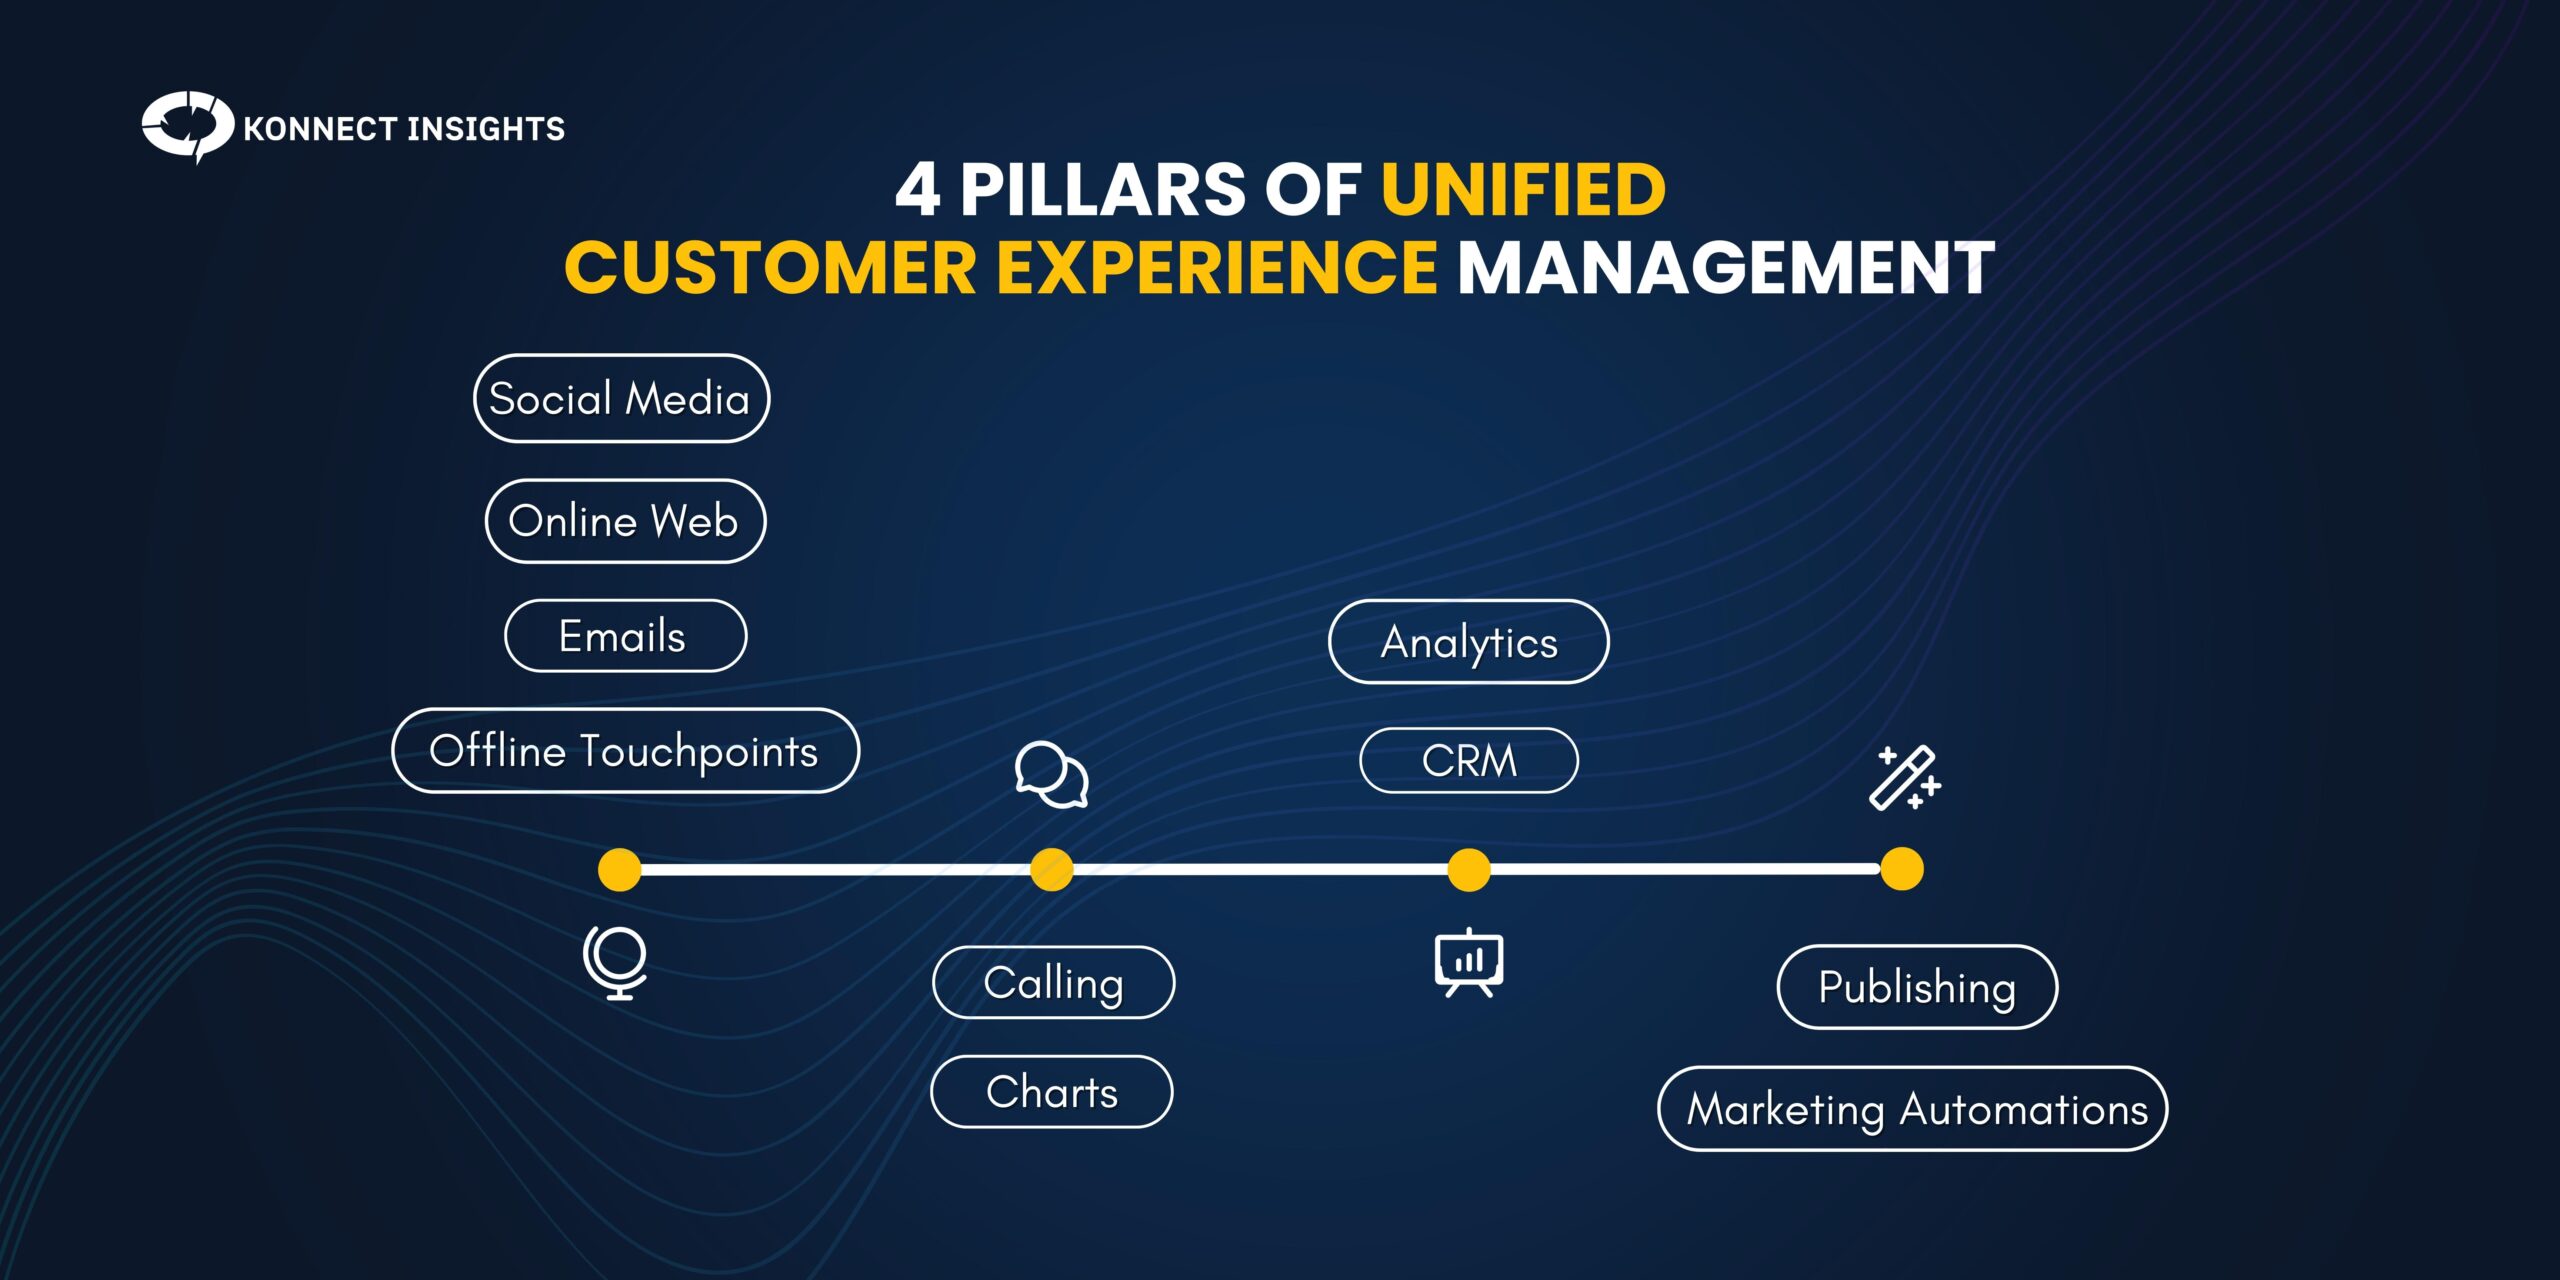 4 Pillars of Unified Customer Experience Management